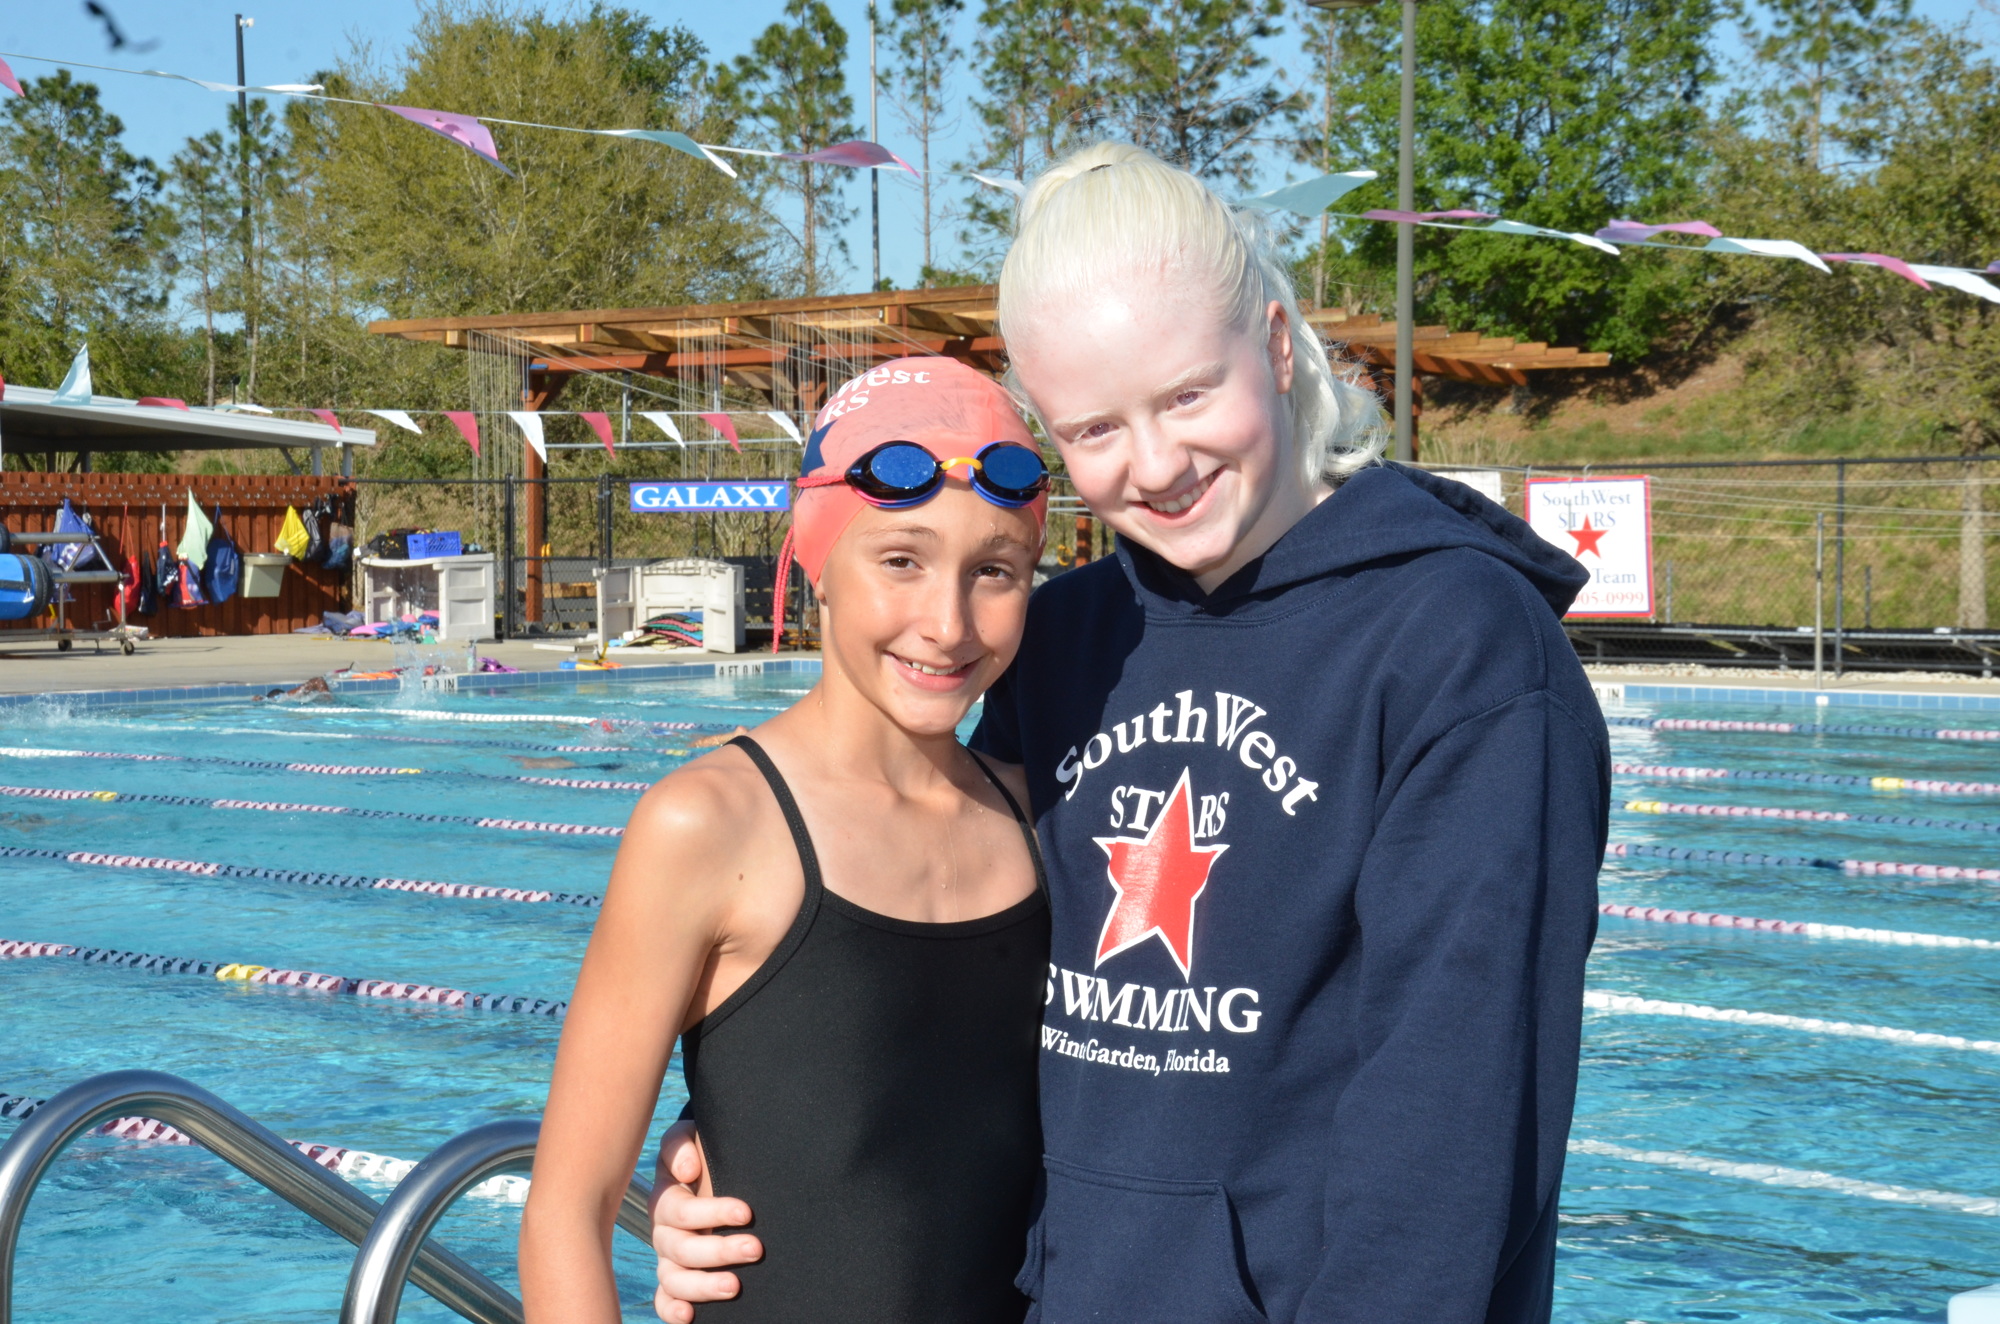 Ella Klyce, left, and Marcela Scaramuzza were among the individual champions for the SouthWest STARS at the Florida Age Group Championships.